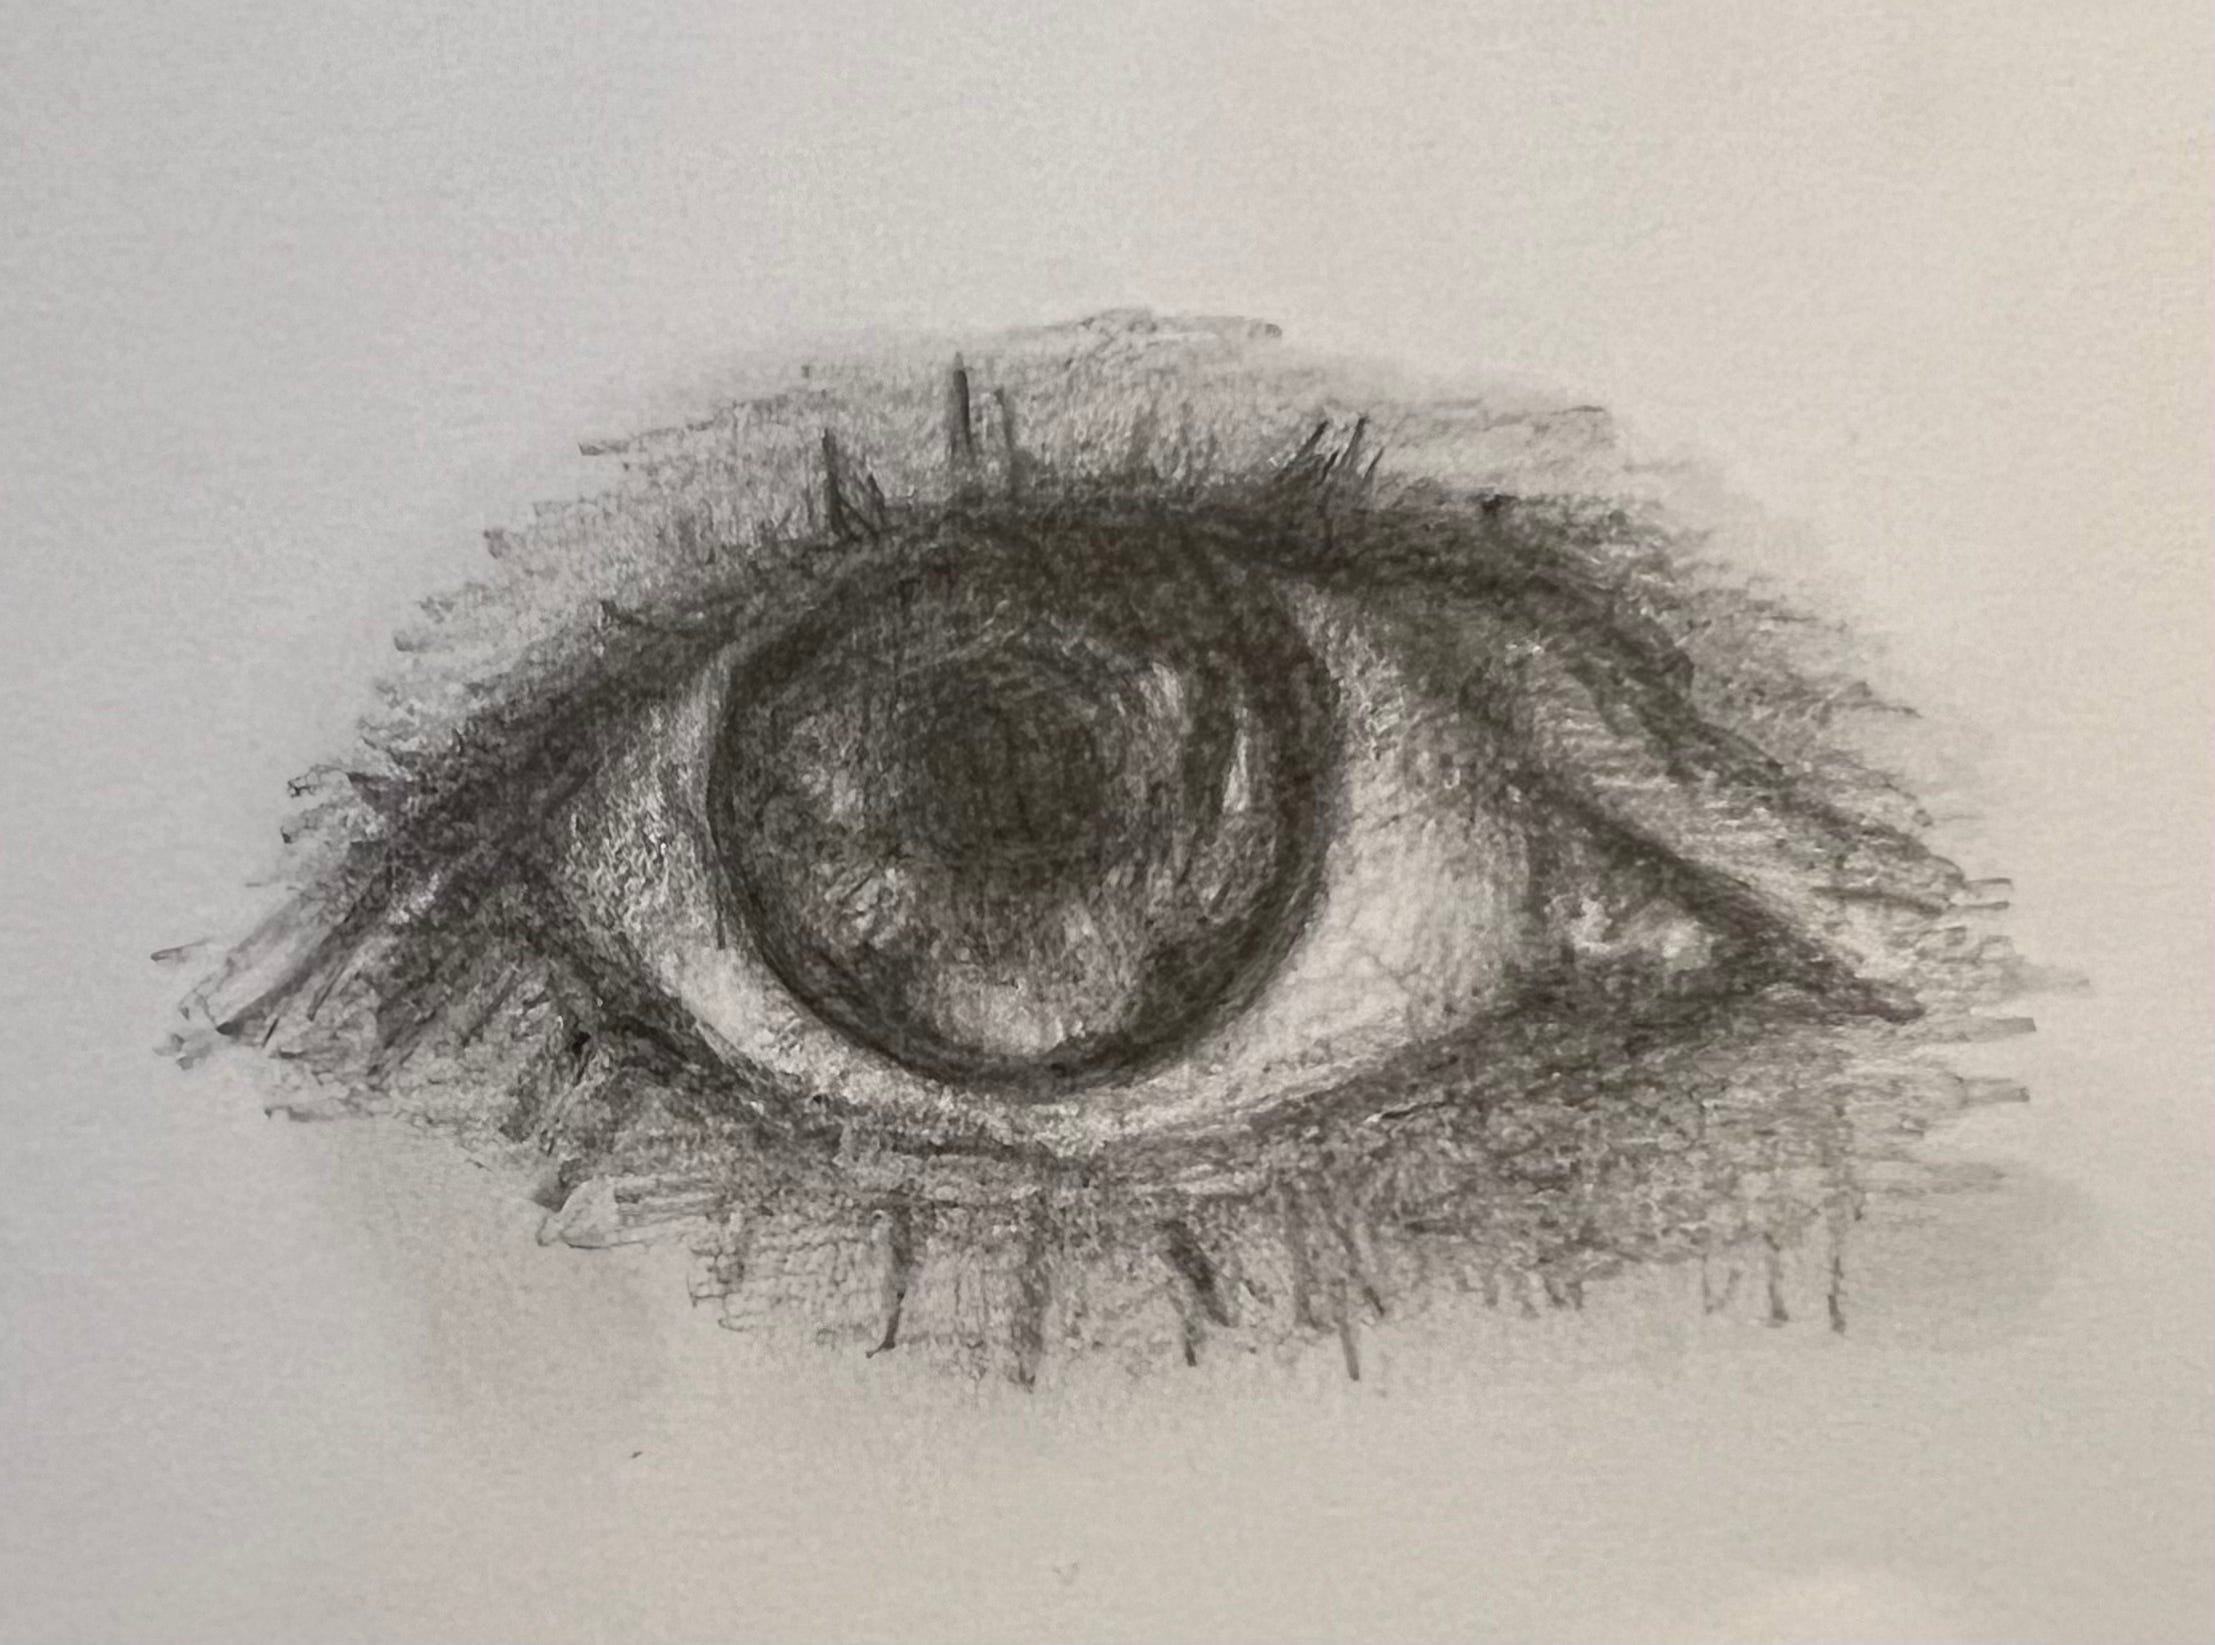 Eye Drawing with HB Pencil  Kids Eye Drawing for Beginners 